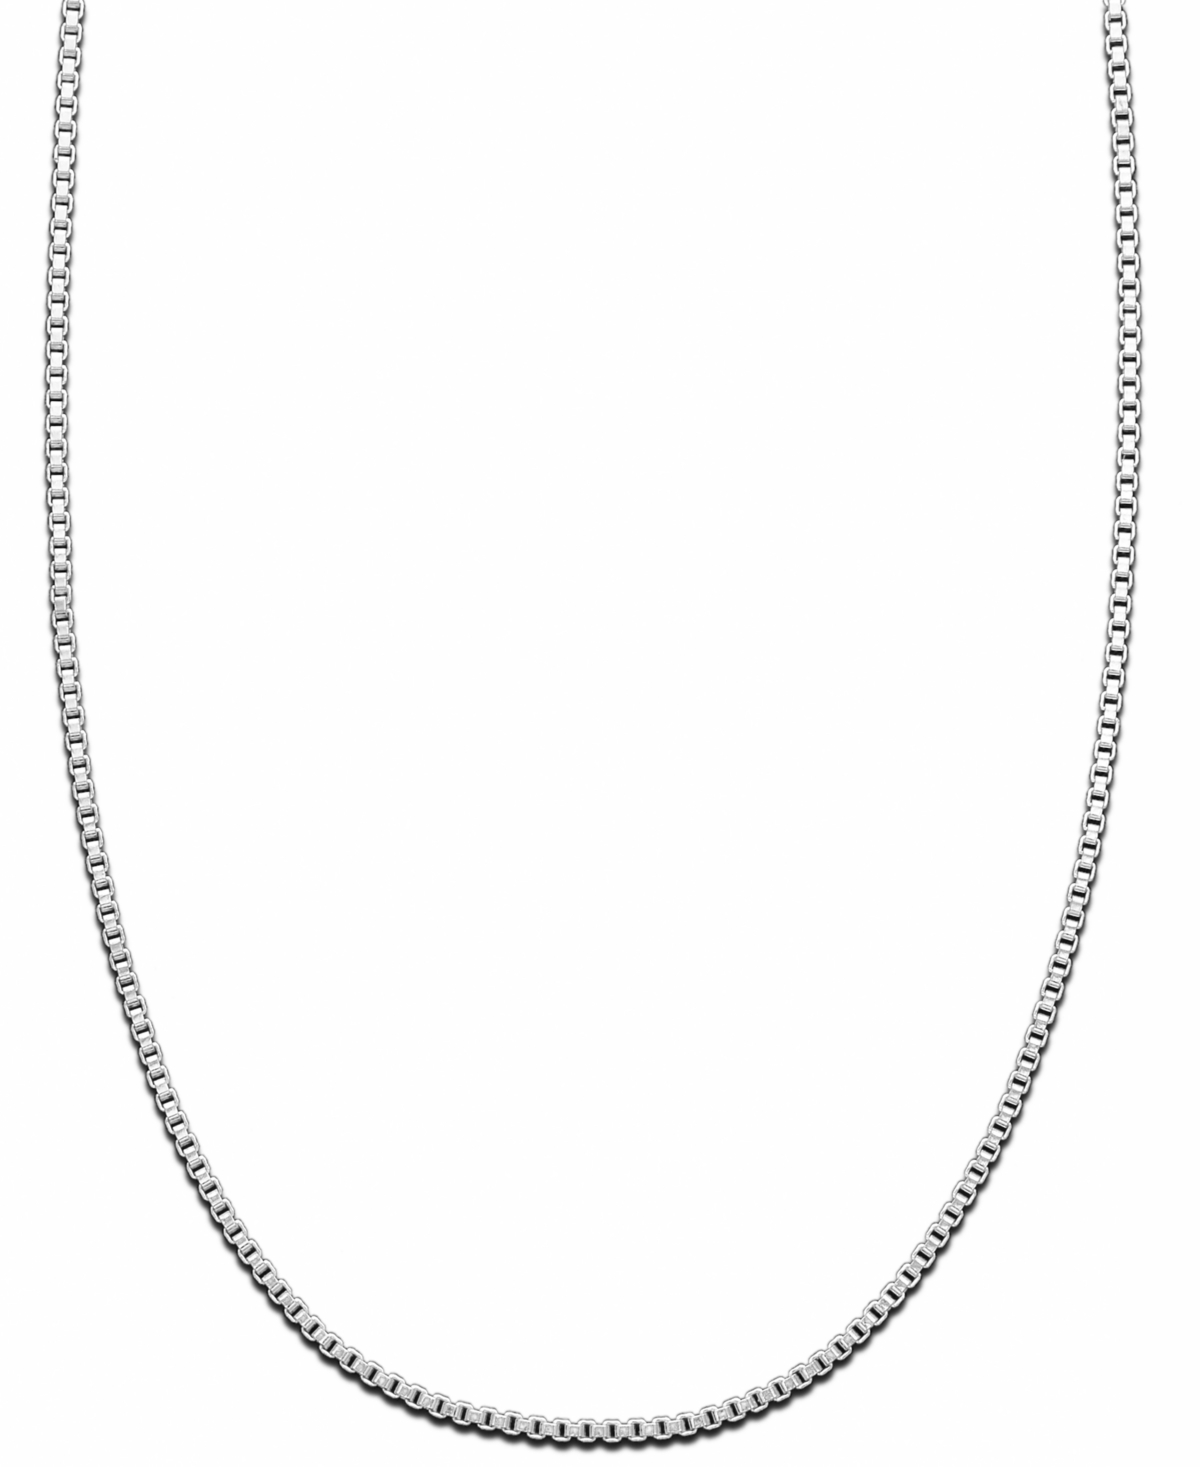 Box Link 16" Chain Necklace in Sterling Silver, Created for Macy's